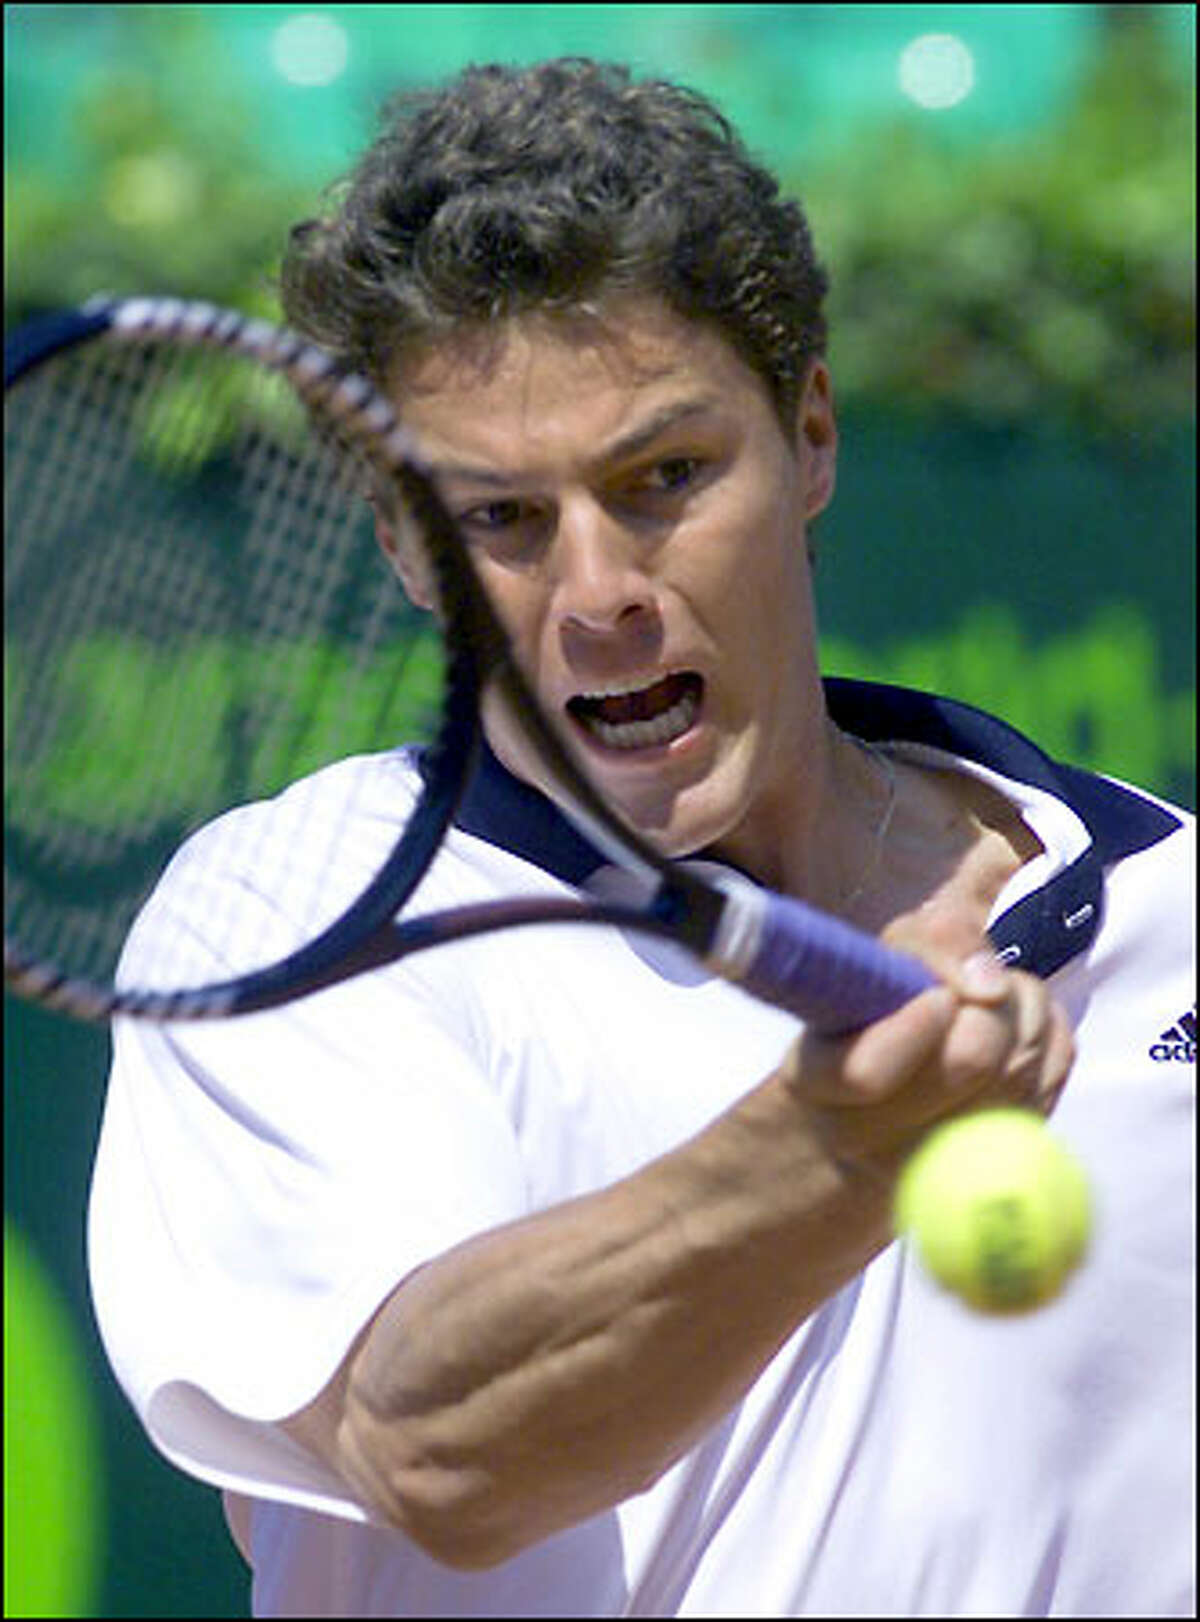 Marat Safin of Russia defeated Pete Sampras of the United States 7-6, 7-5 in the World Team Cup.